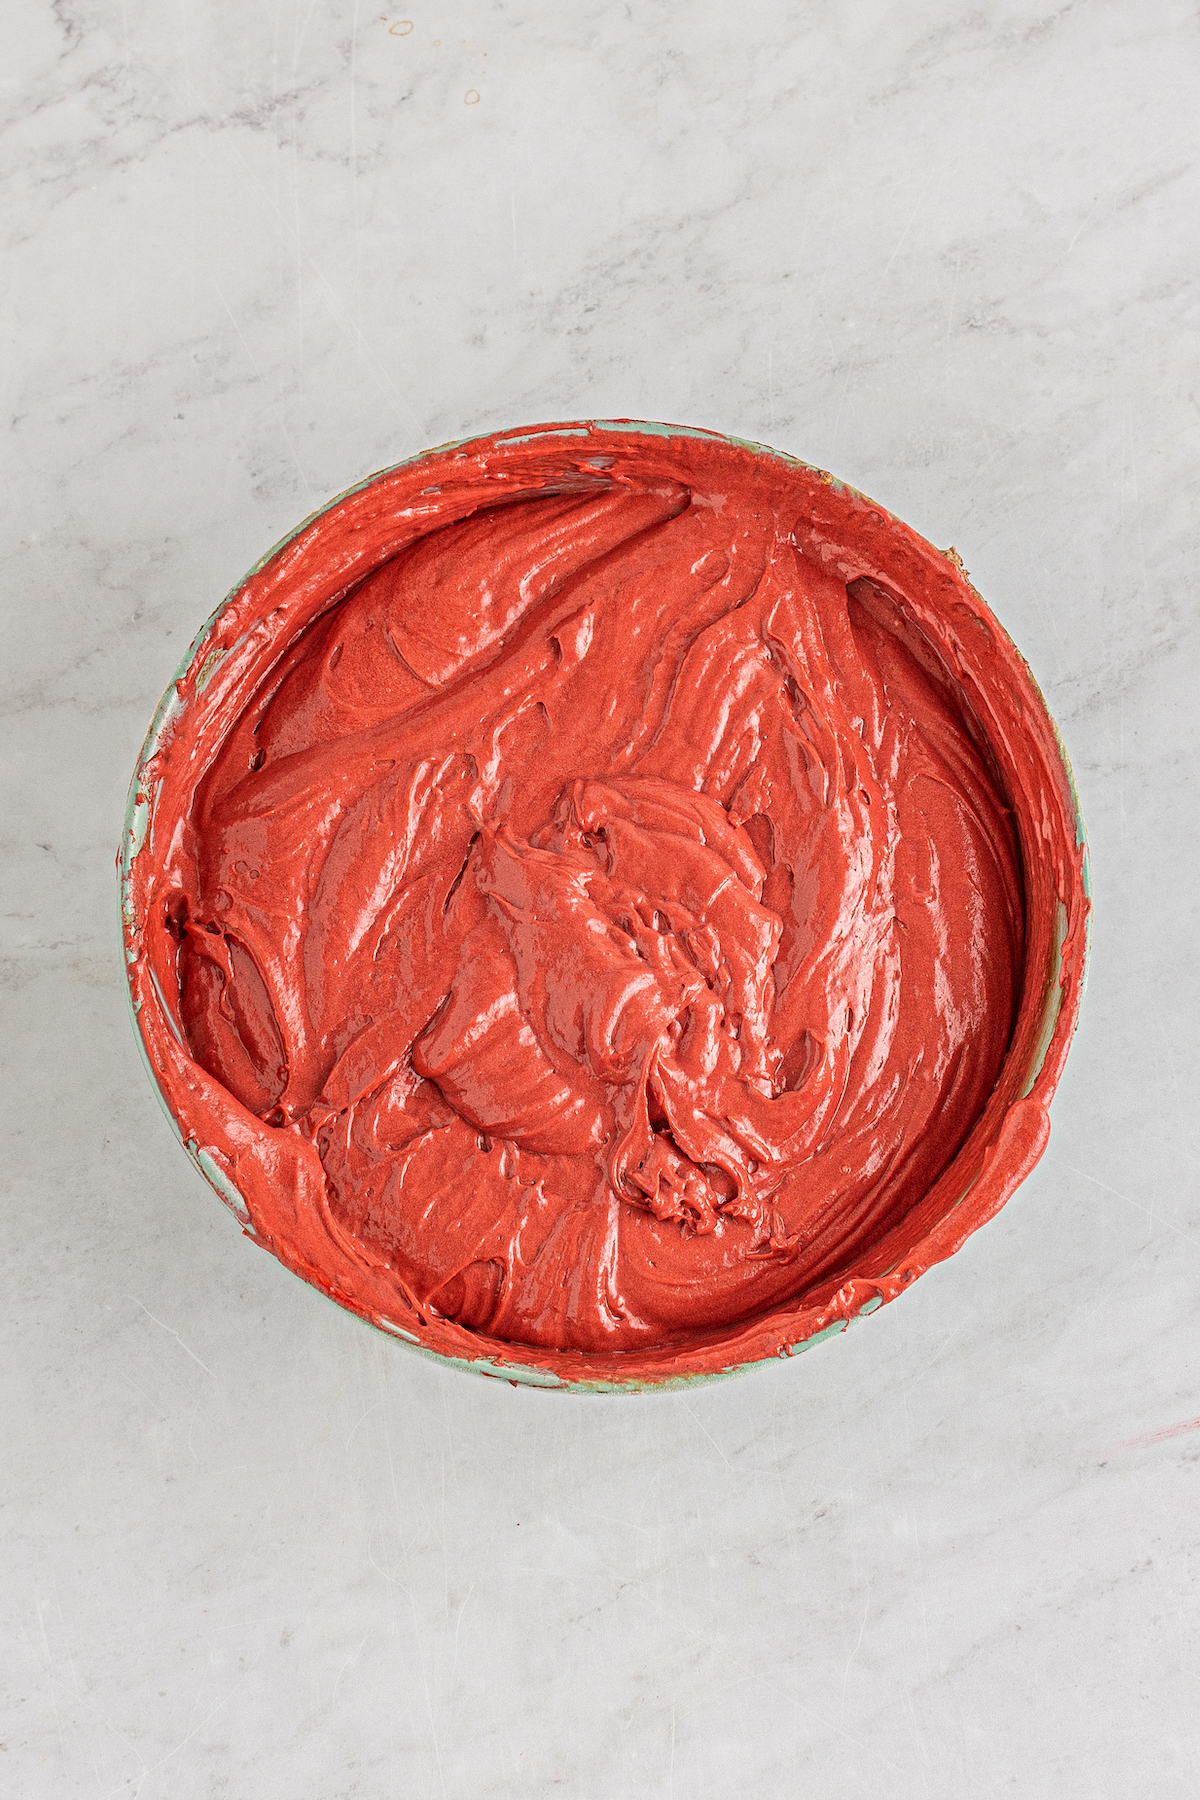 Red batter in a mixing bowl.